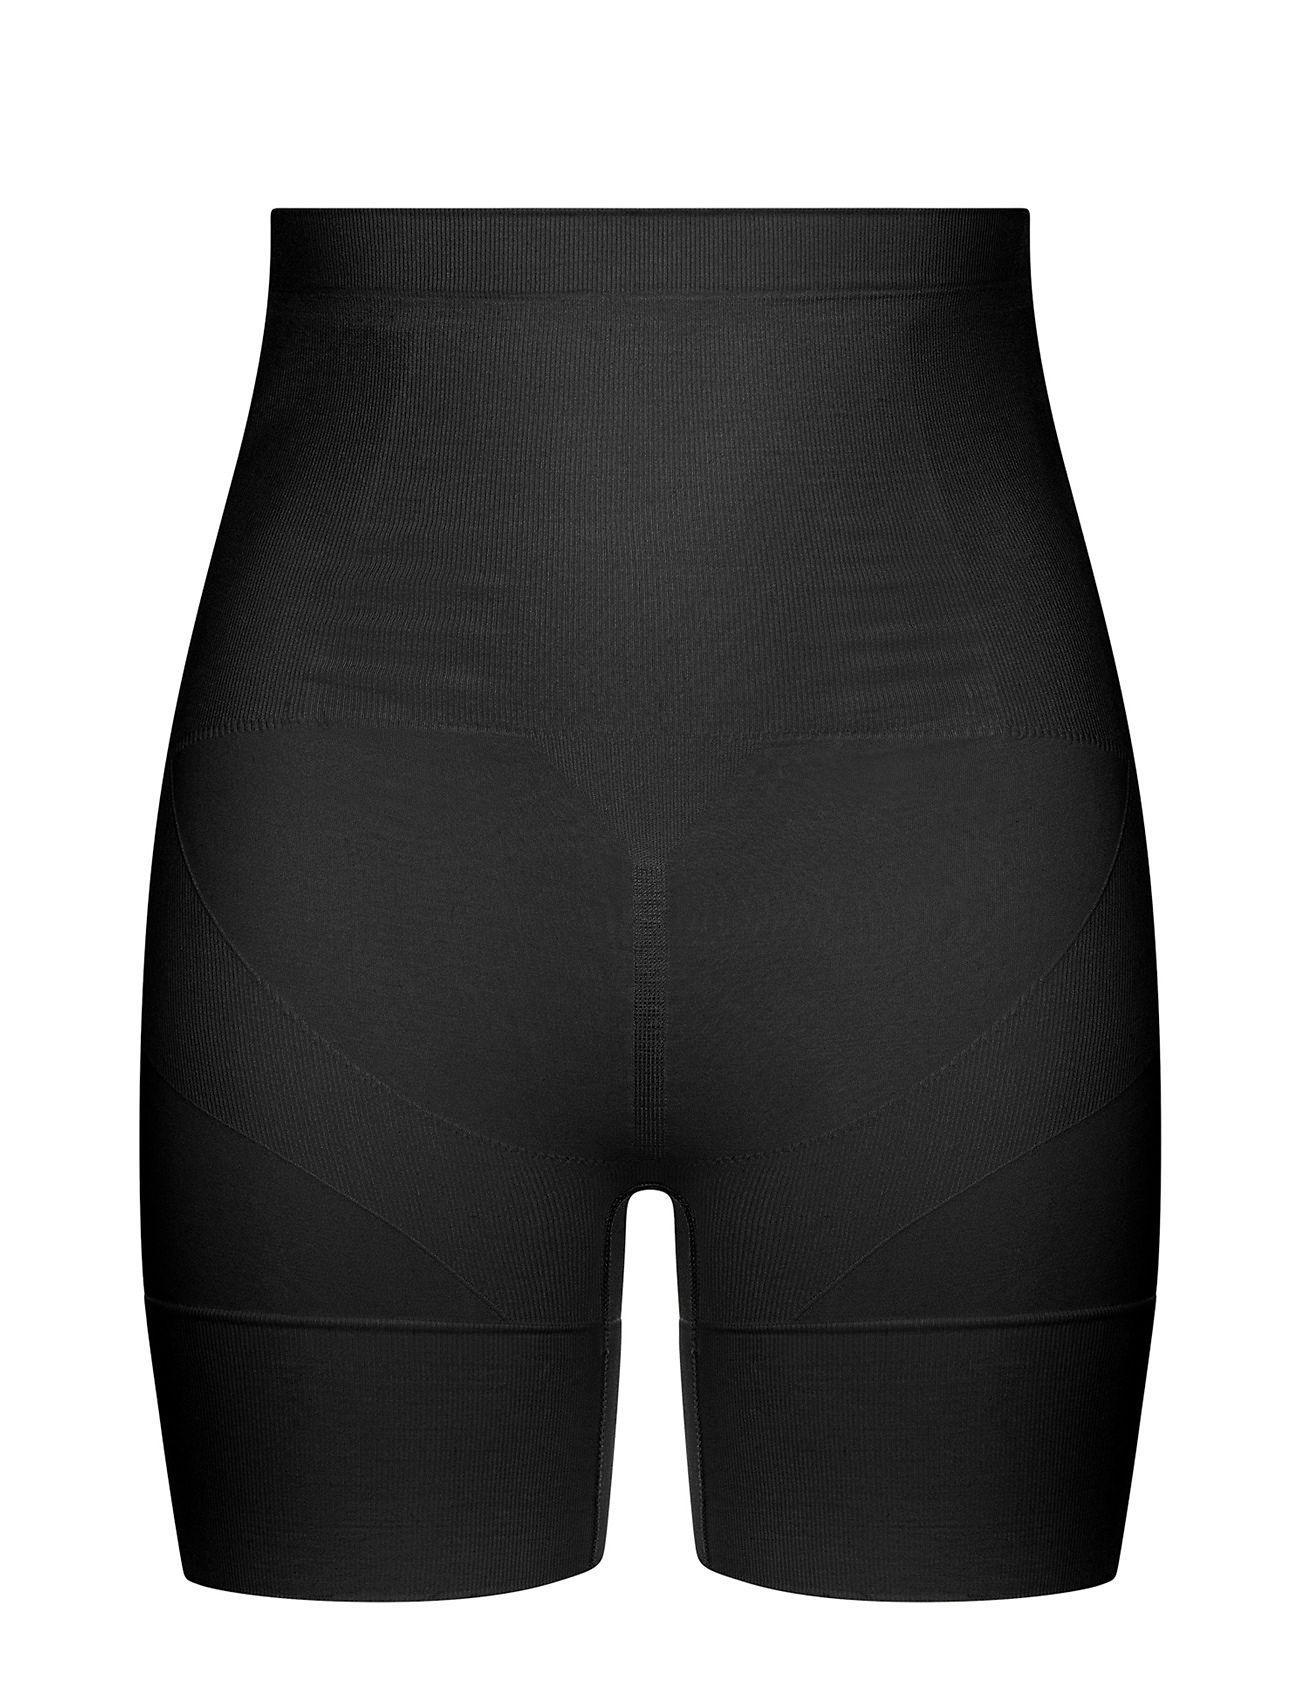 ABSOLUTE SCULPT Shaping_Shorts